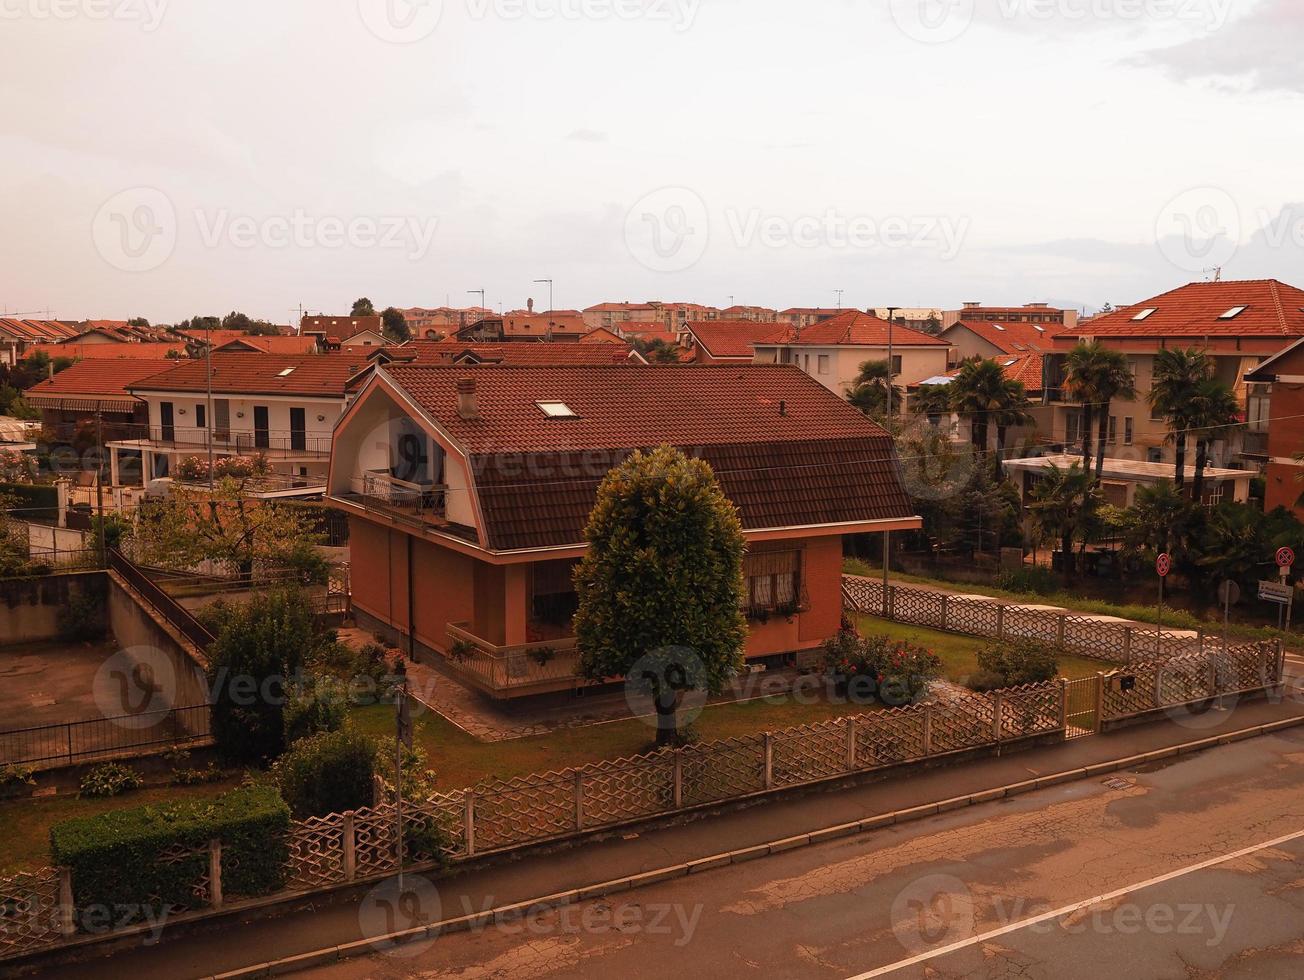 Aerial view of Settimo Torinese at sunset photo